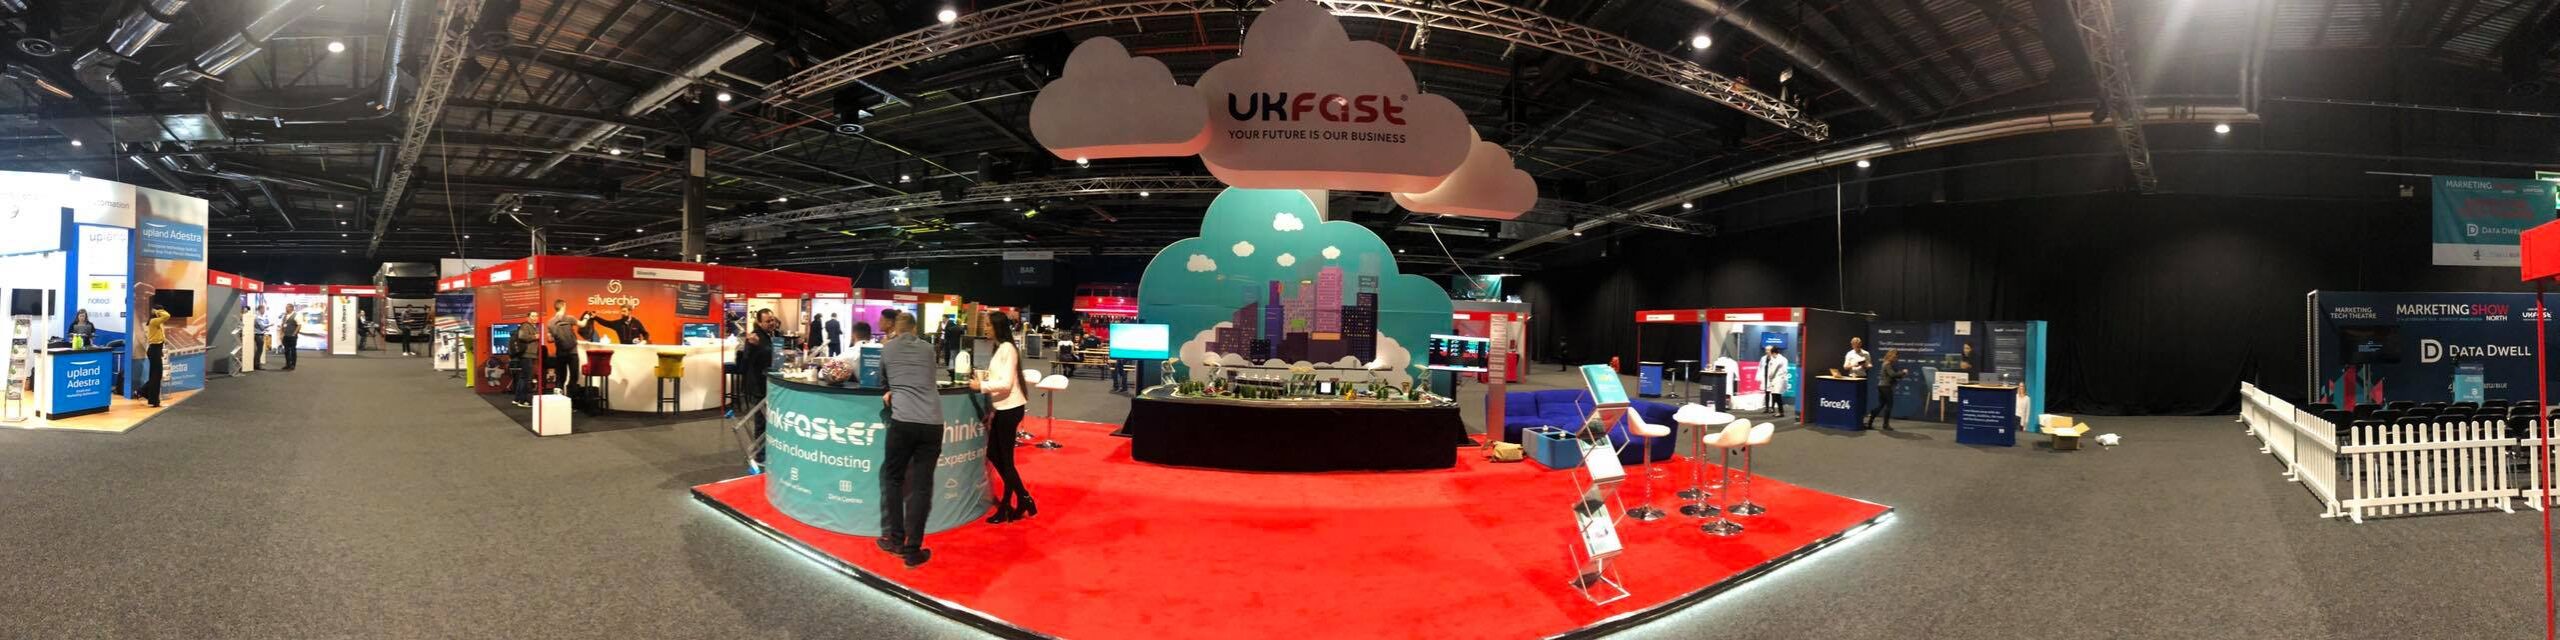 Client: UKFast at Marketing Show North 2019 at EventCity, Manchester